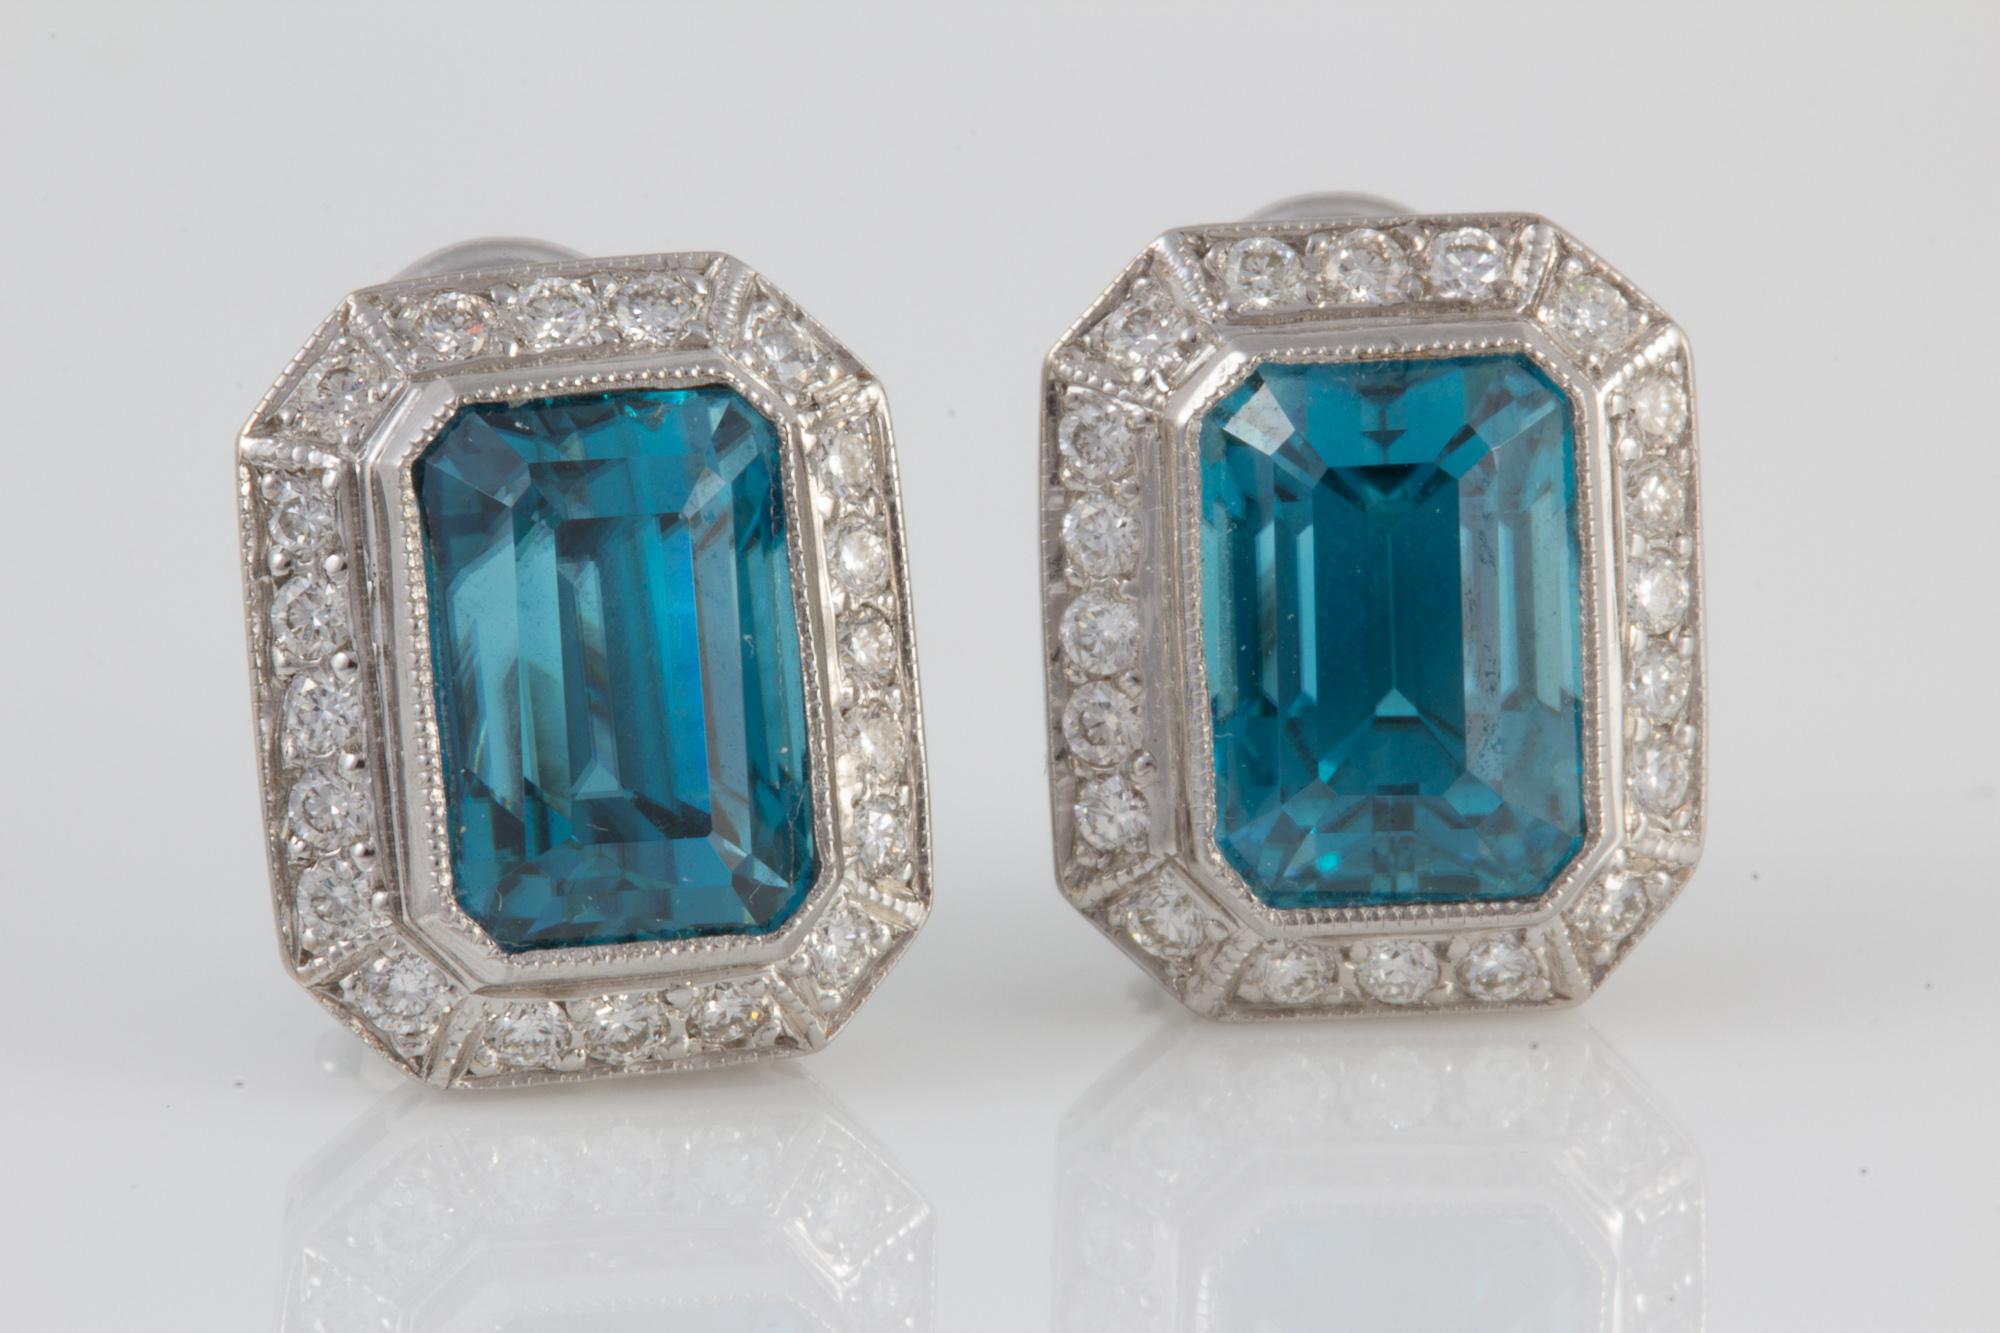 Cambodian Blue Zircon and Diamond Earrings Set in 18 Karat Gold and Platinum For Sale 7